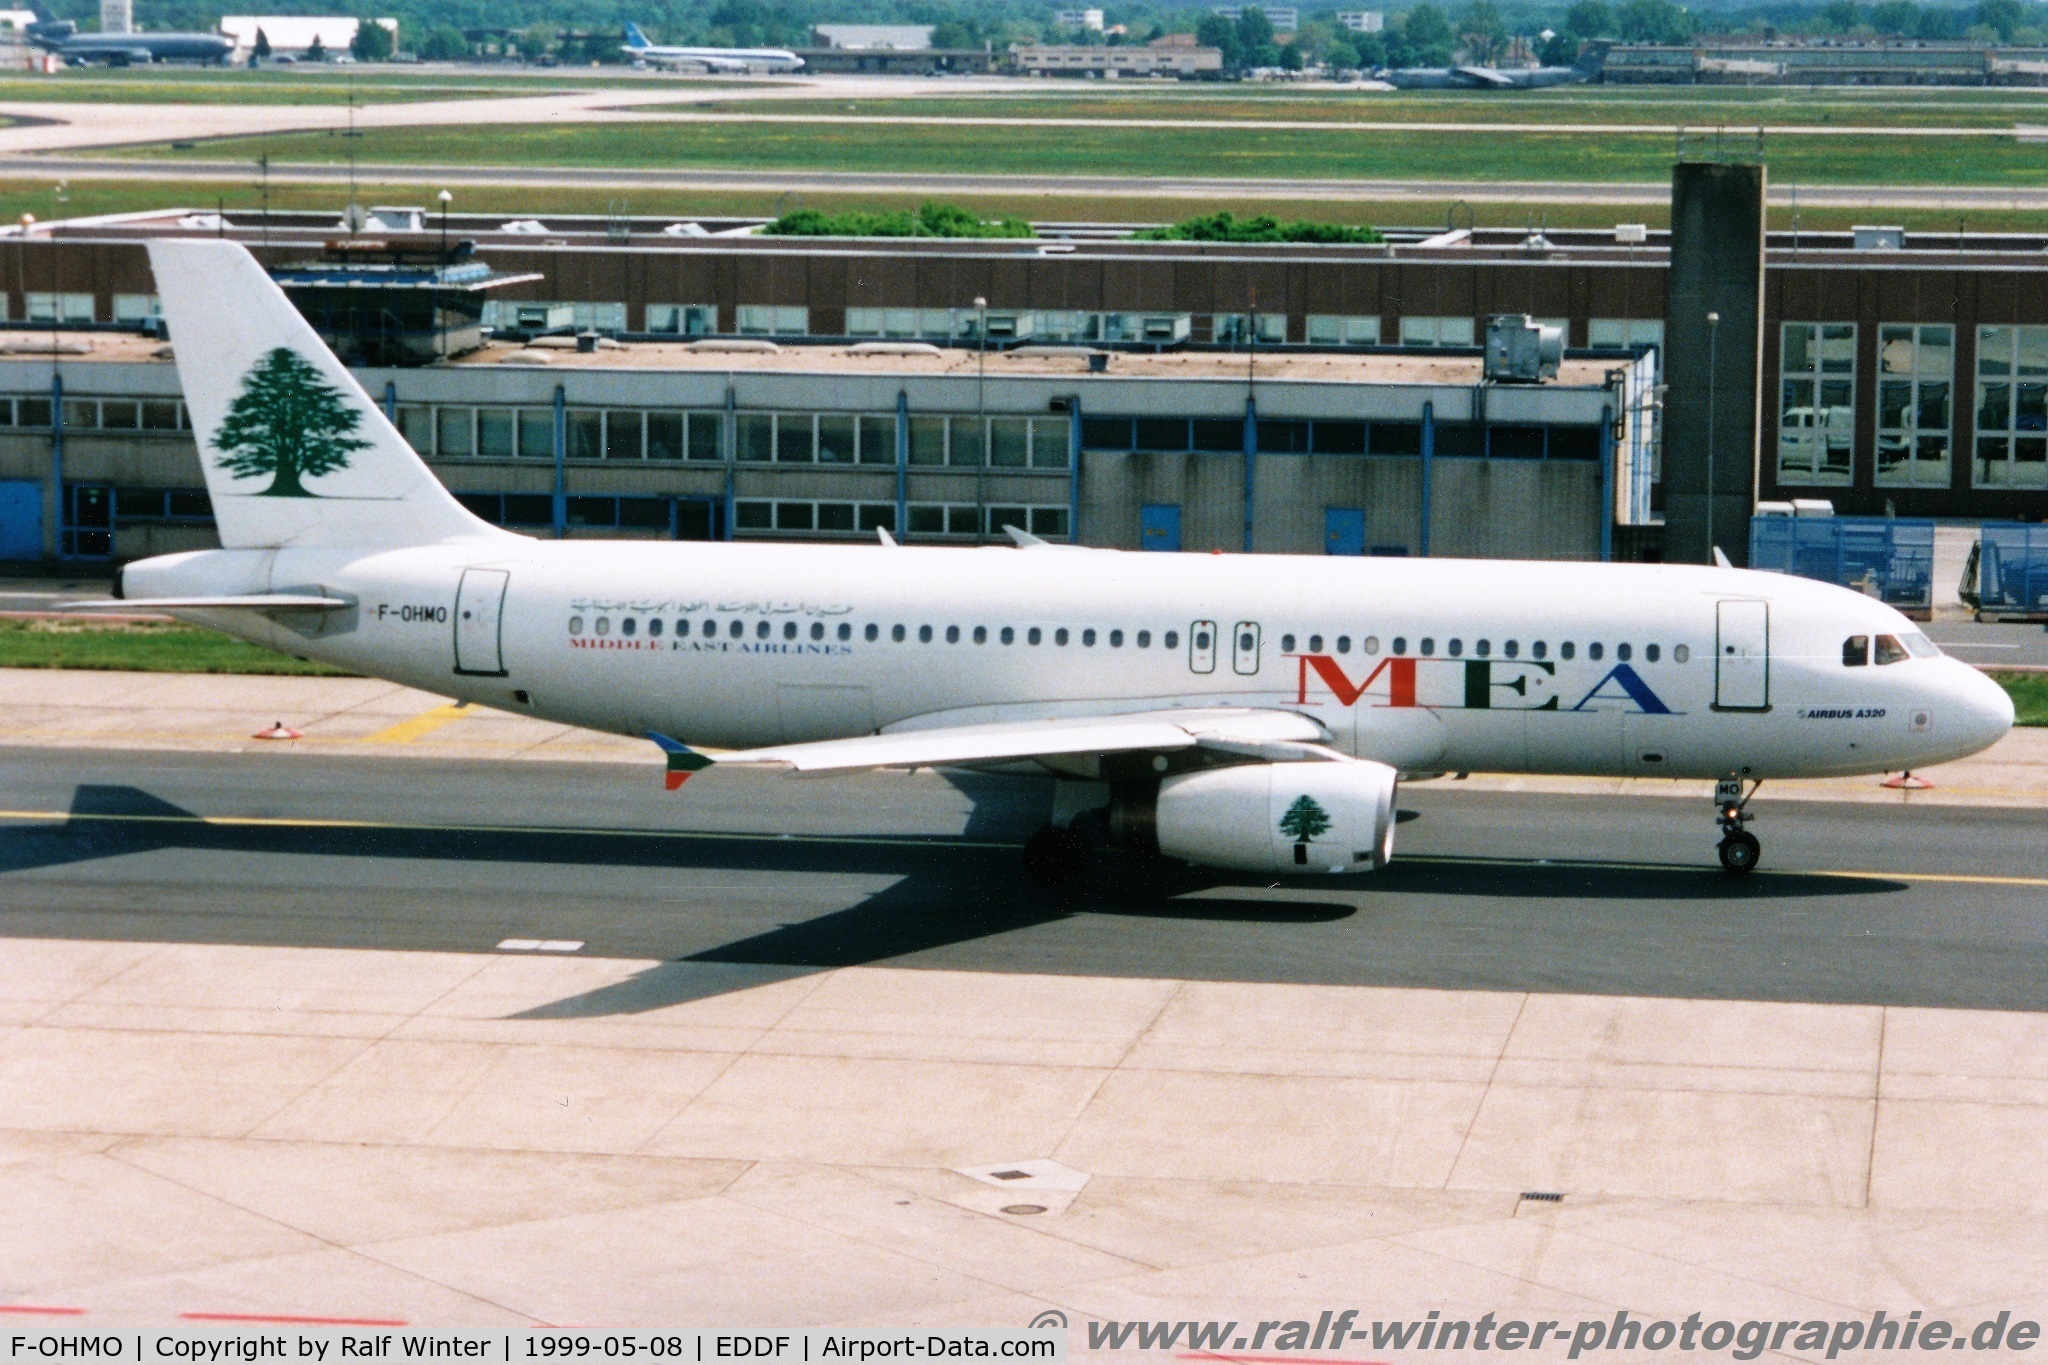 F-OHMO, 1997 Airbus A320-232 C/N 640, Airbus A320-232 - ME MEA Middle East Airlines - 640 - F-OHMO - 05.1999 - FRA